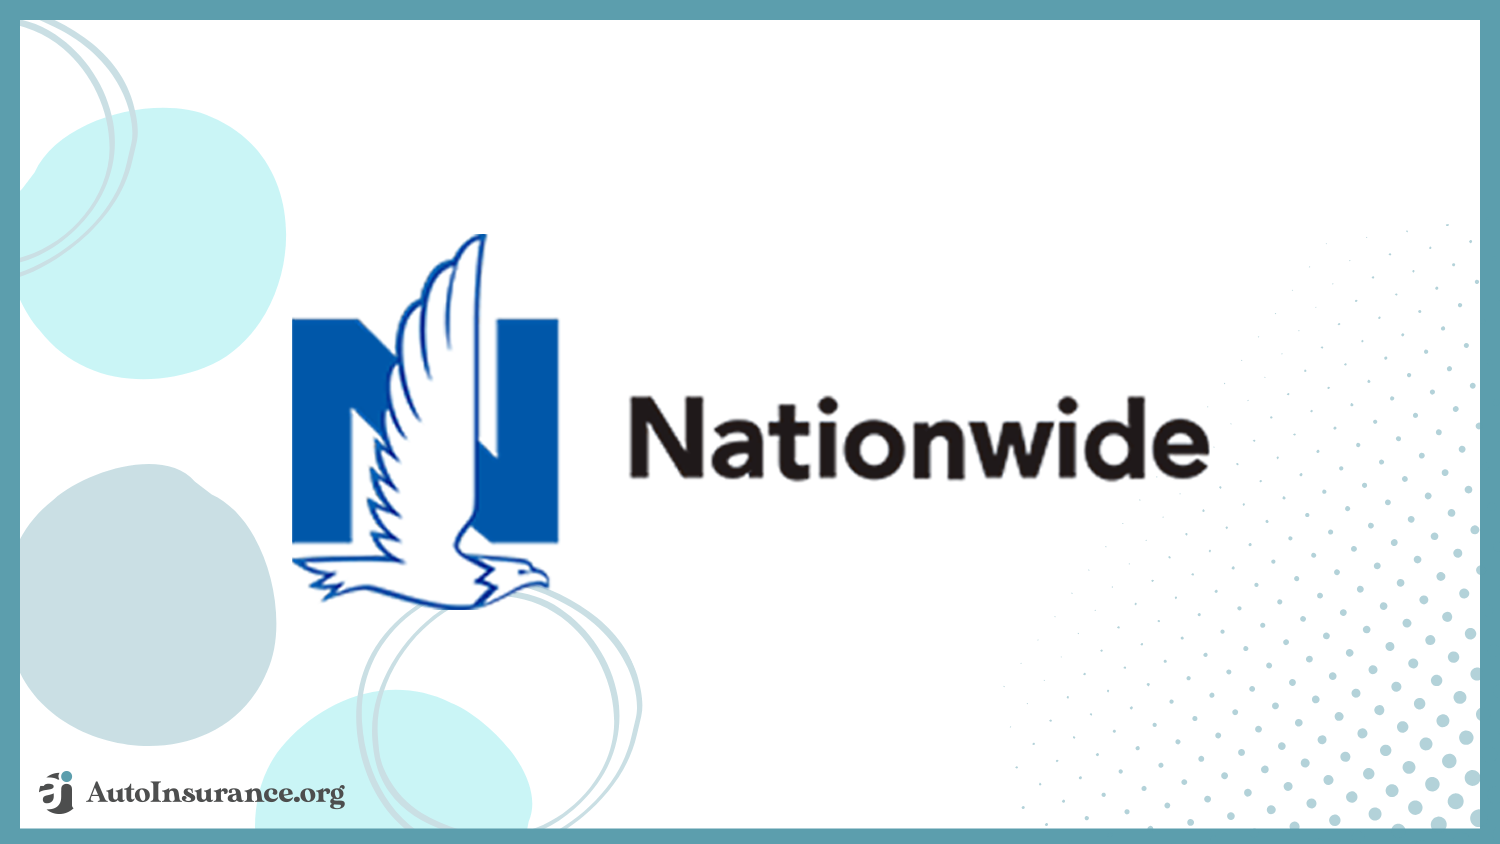 Nationwide: Best Auto Insurance for Low-Income Drivers